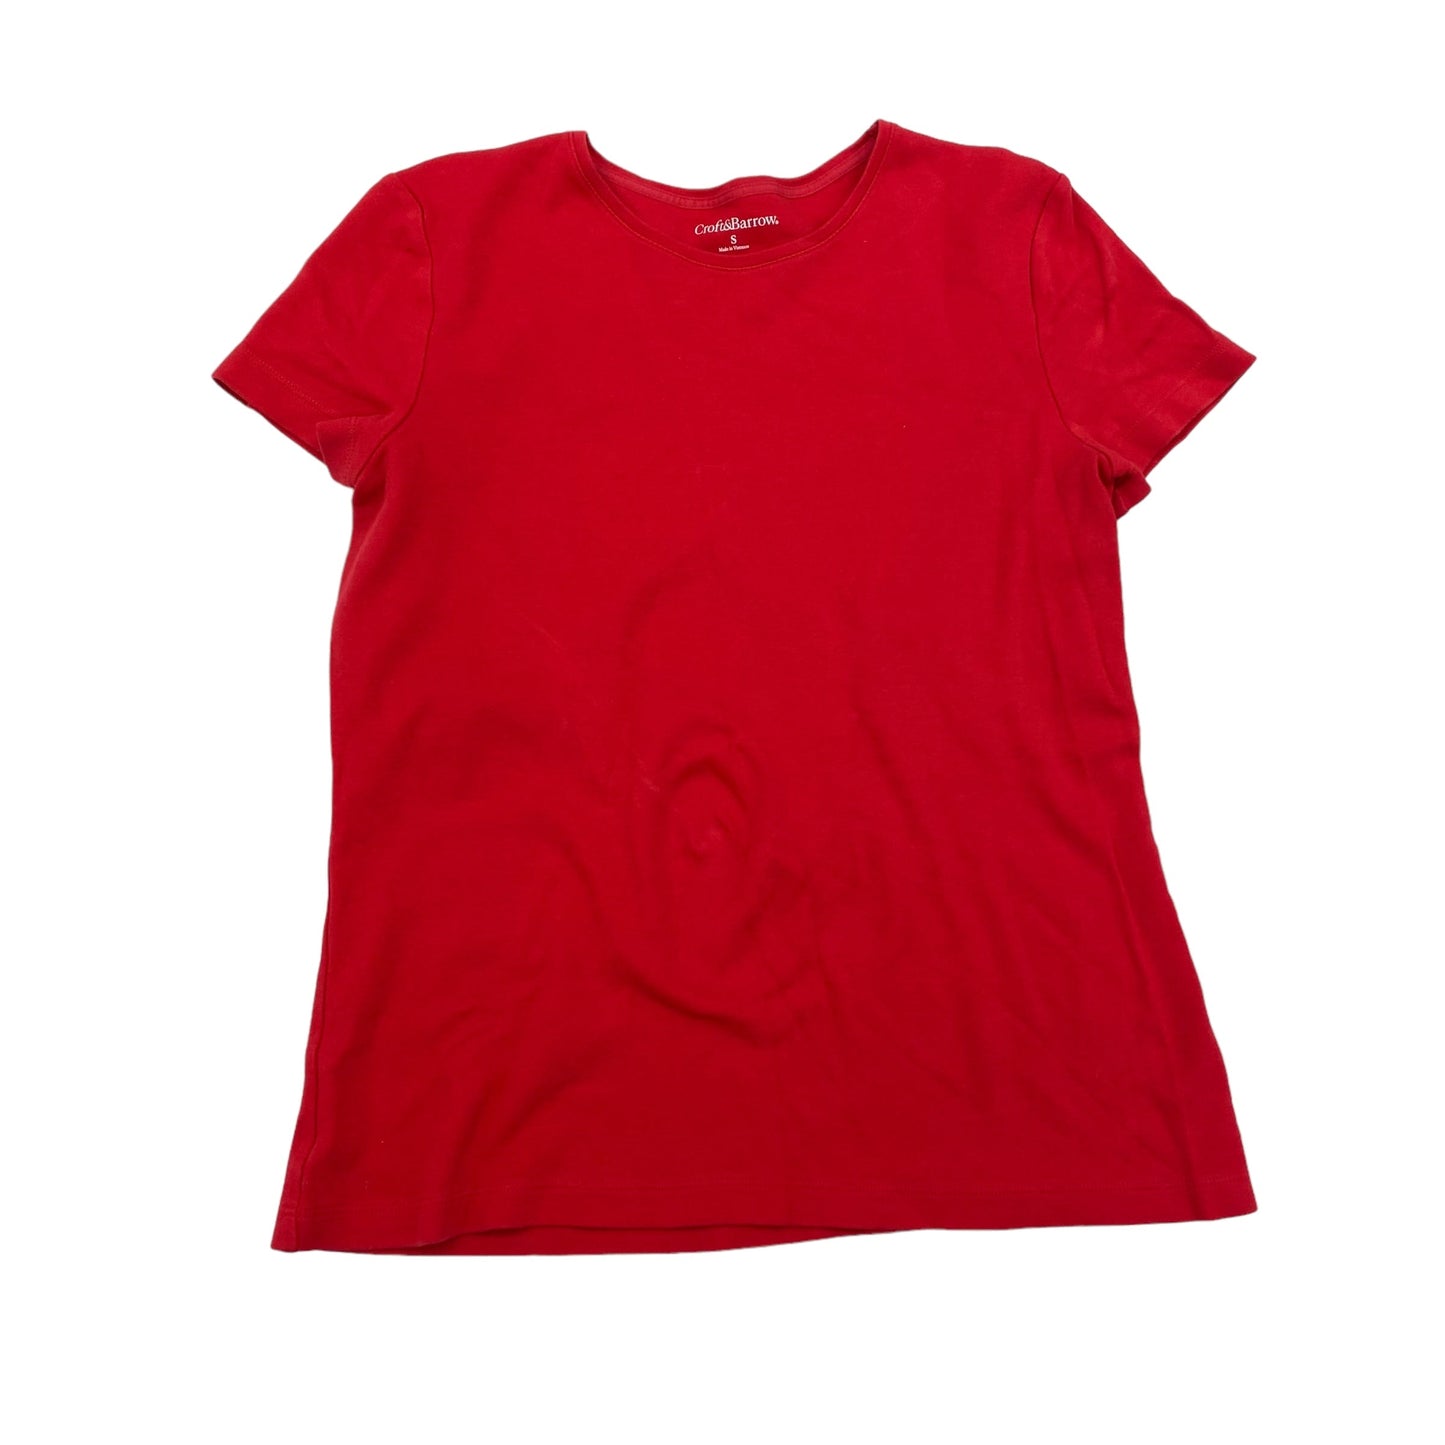 RED CROFT AND BARROW TOP SS BASIC, Size S